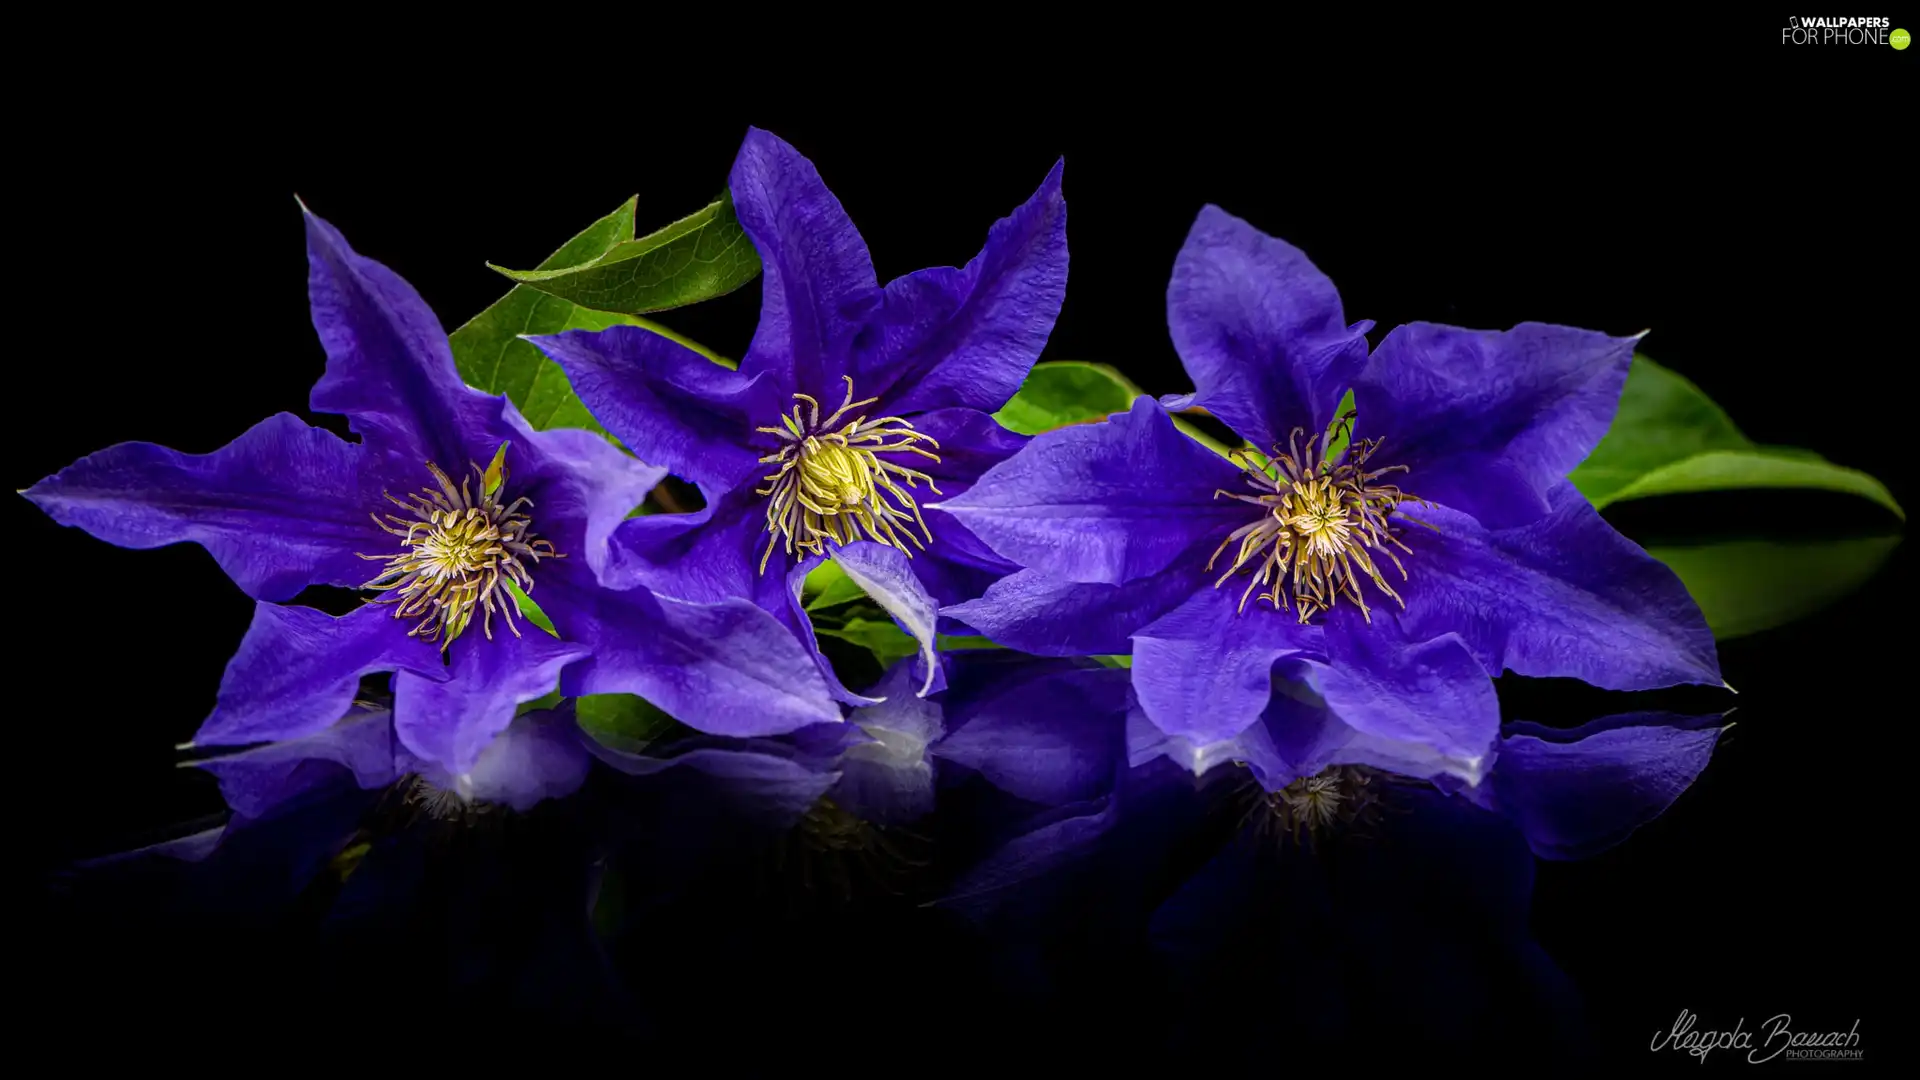 Black, background, Blue, Clematis, Flowers